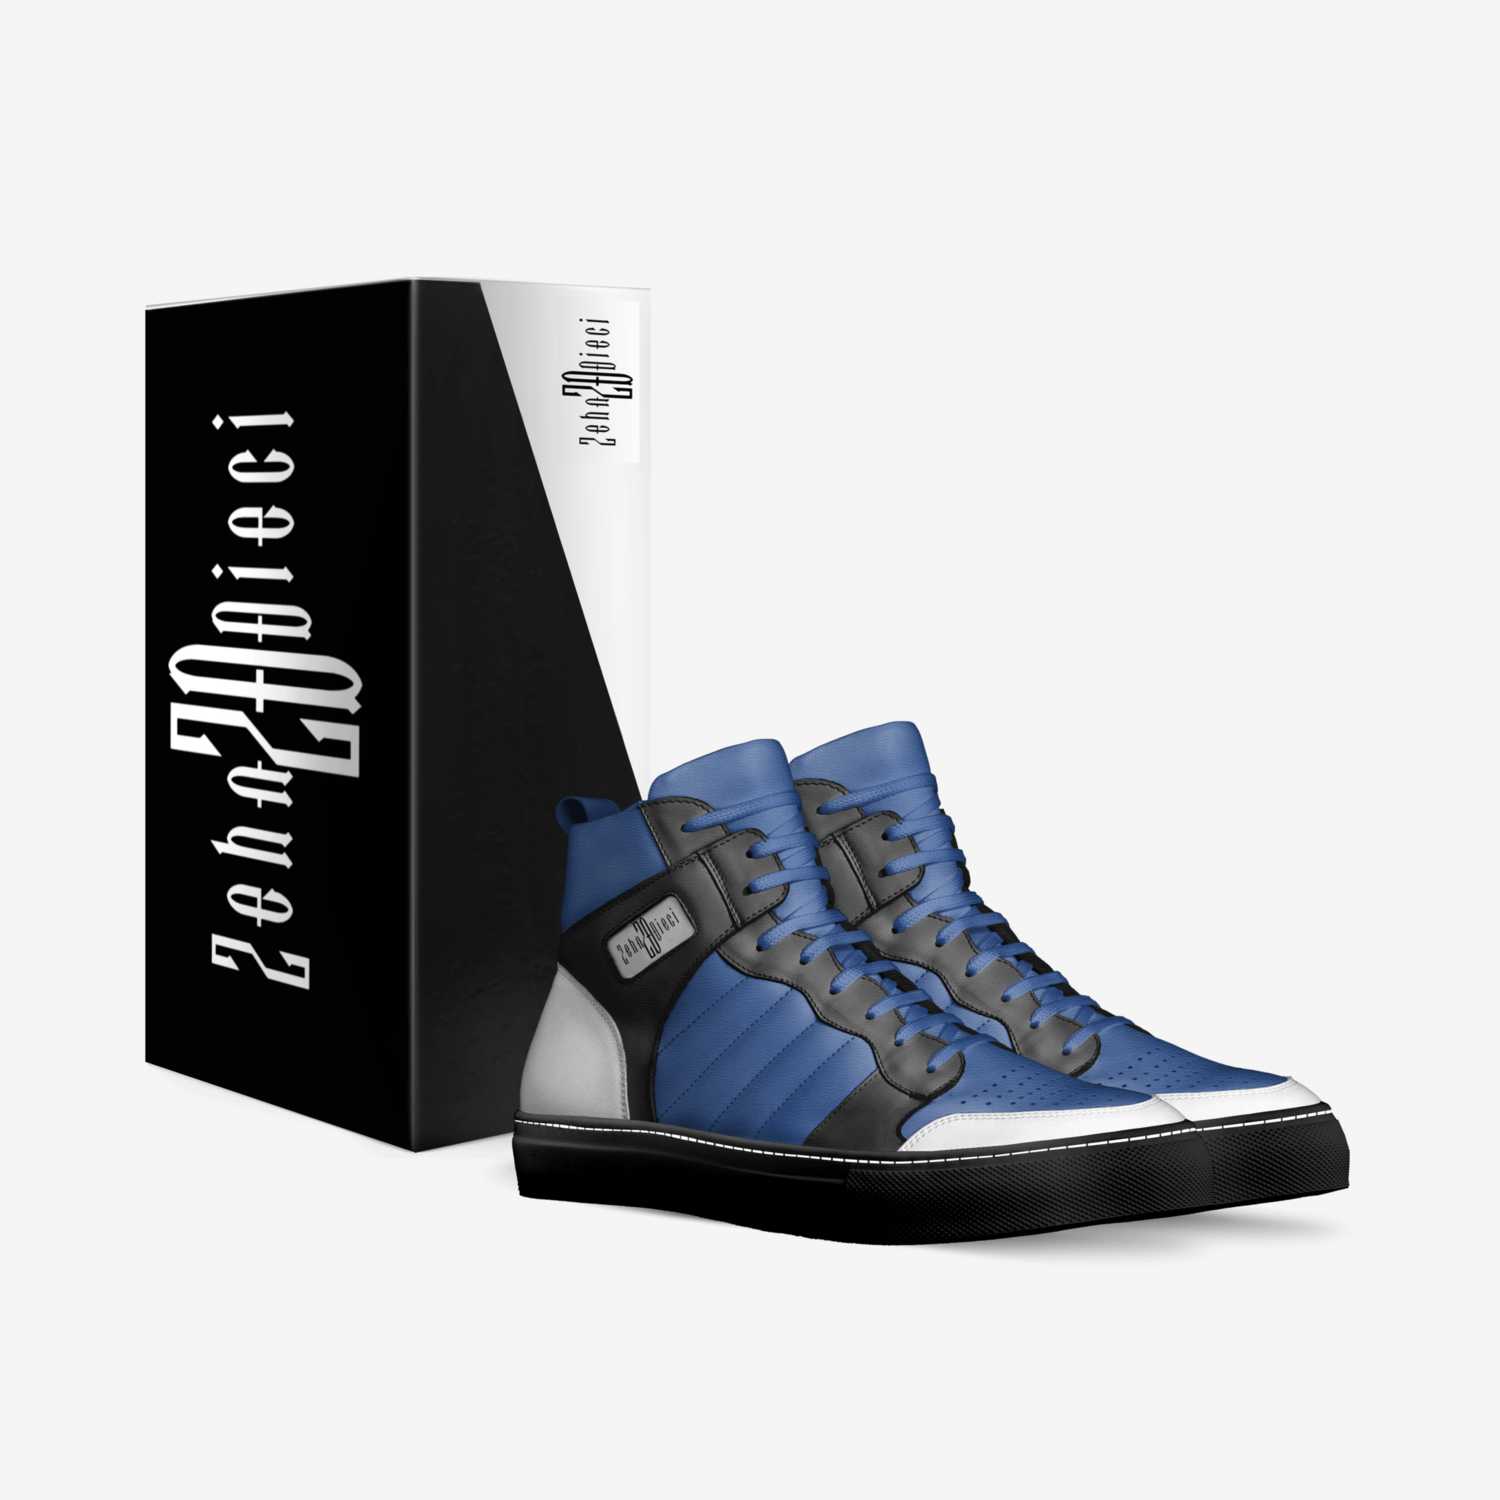 Dix 1 "Blau" custom made in Italy shoes by Zehn Dieci | Box view